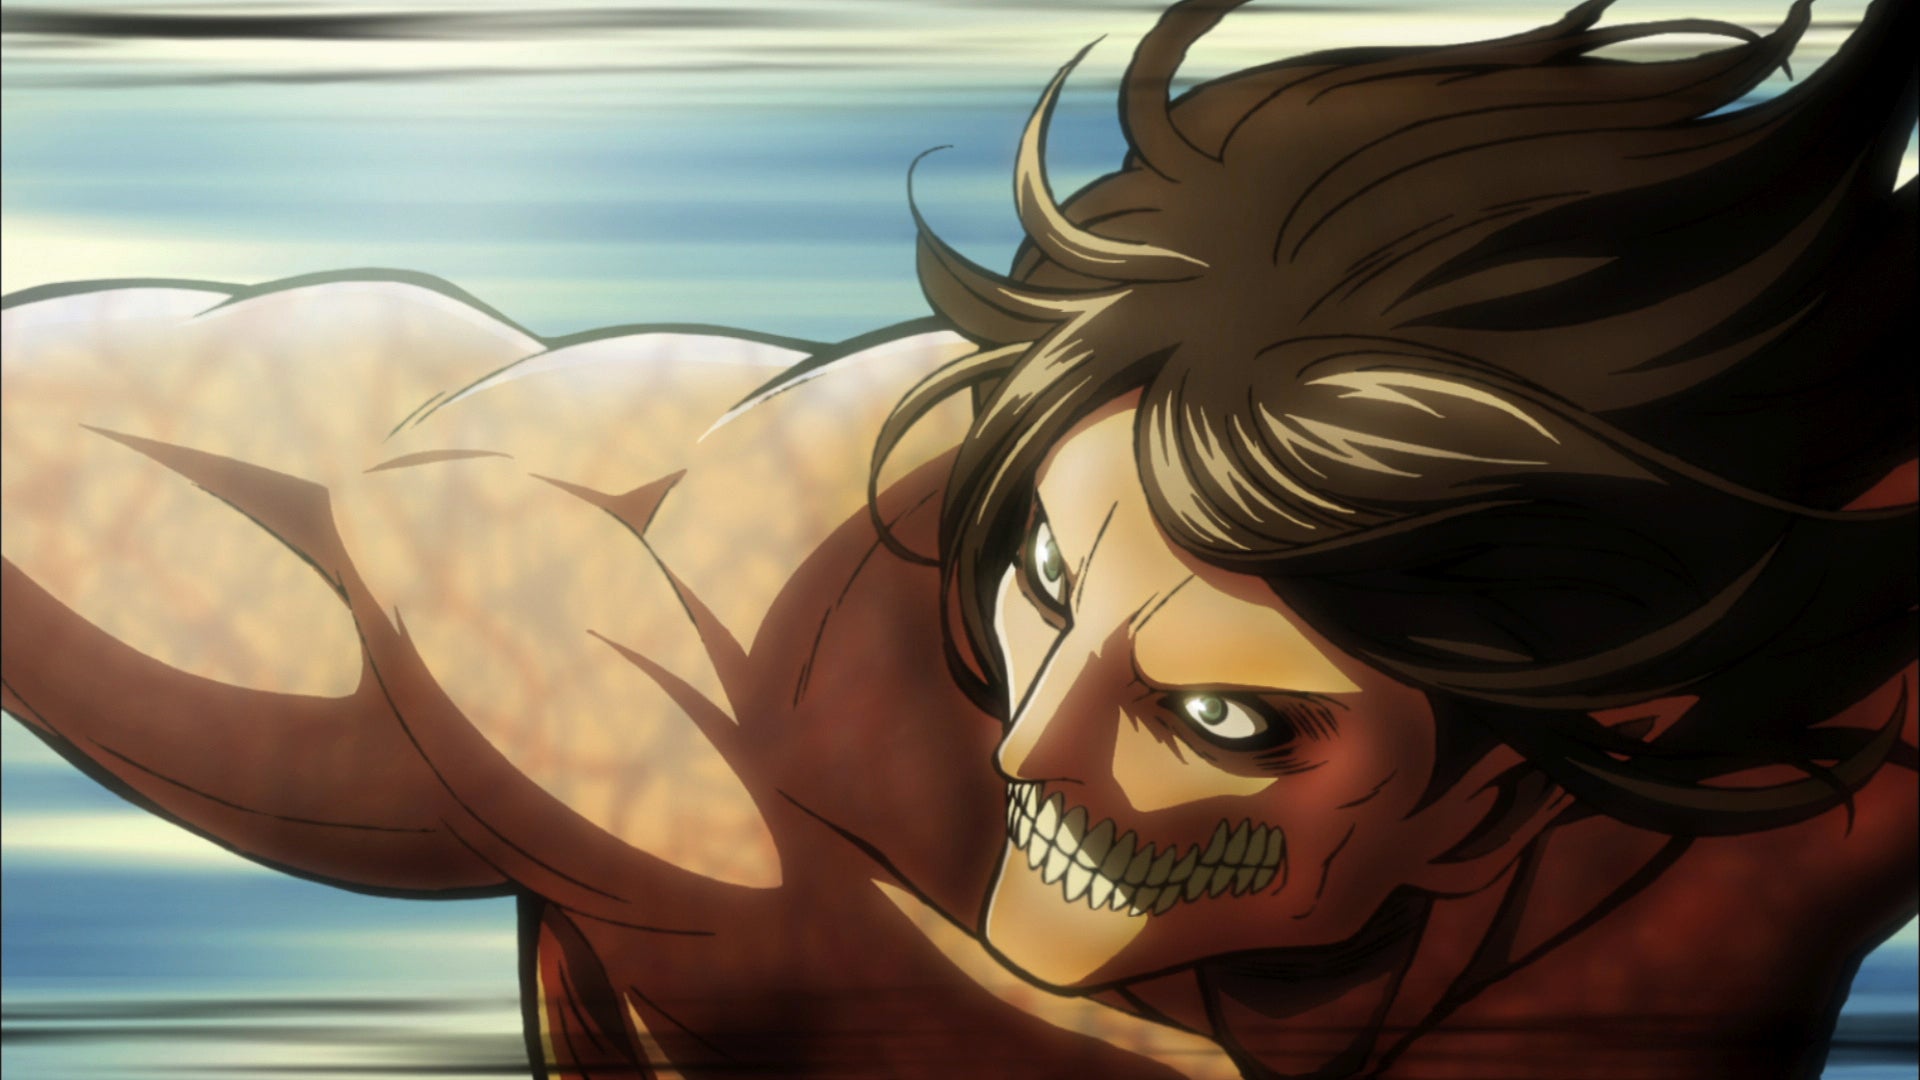 Attack on Titan's Final Season Continues This Winter!